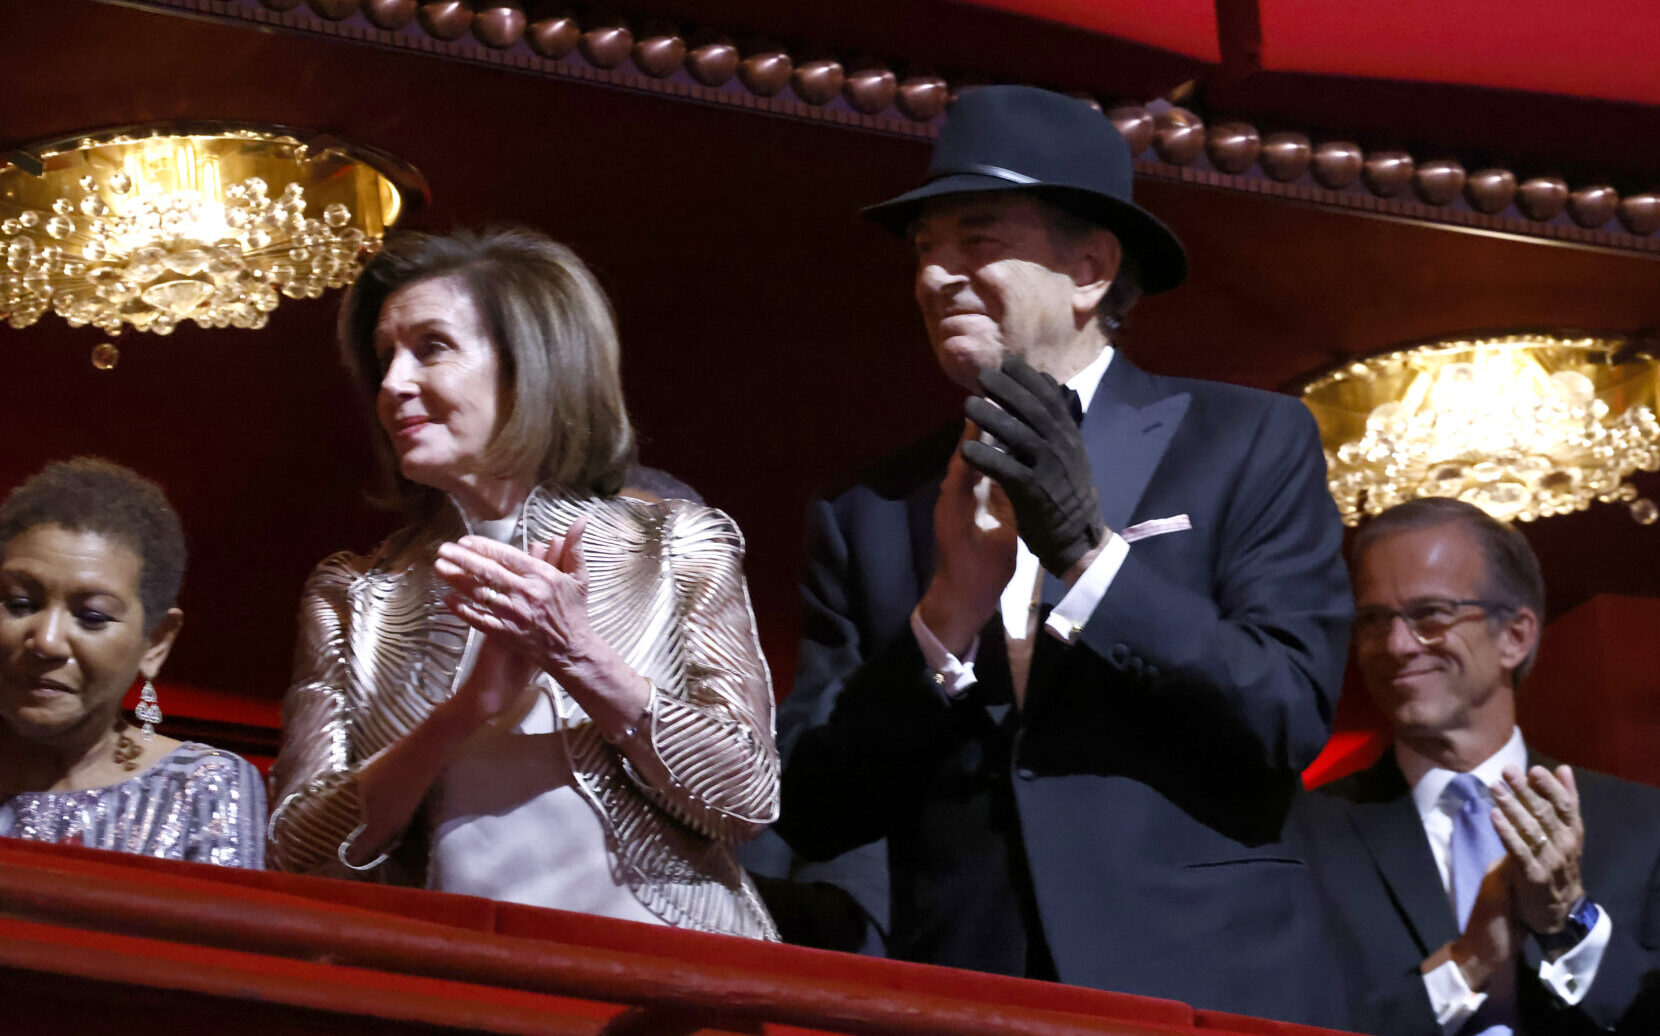 WASHINGTON, DC - DECEMBER 04: Nancy Pelosi and Paul Pelosi attend the 45th Kennedy Center Honors ceremony at The Kennedy Center on December 04, 2022 in Washington, DC. (Photo by Paul Morigi/Getty Images)